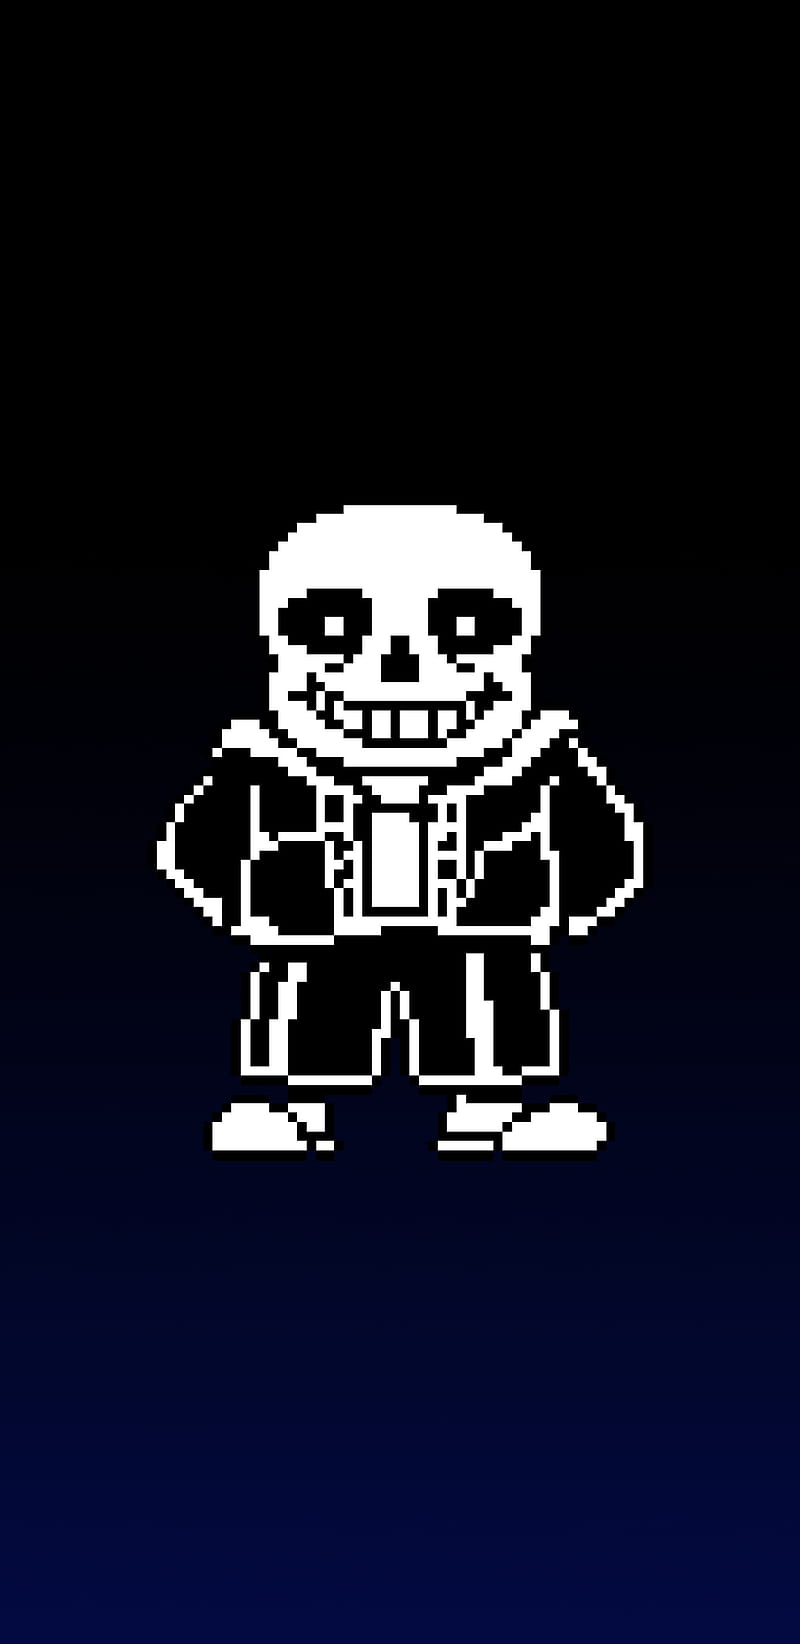 Undertale, Sony, electric blue, Indie, Nintendo, Platform, GameMaker, The Game Award, Toby Fox, Indie Game, Android, PlayStation 4, Deltarune, PlayStation 5, Role-playing video game, Game, Nintendo Switch, PlayStation, Games, Microsoft, Xbox, Platform Game, HD phone wallpaper